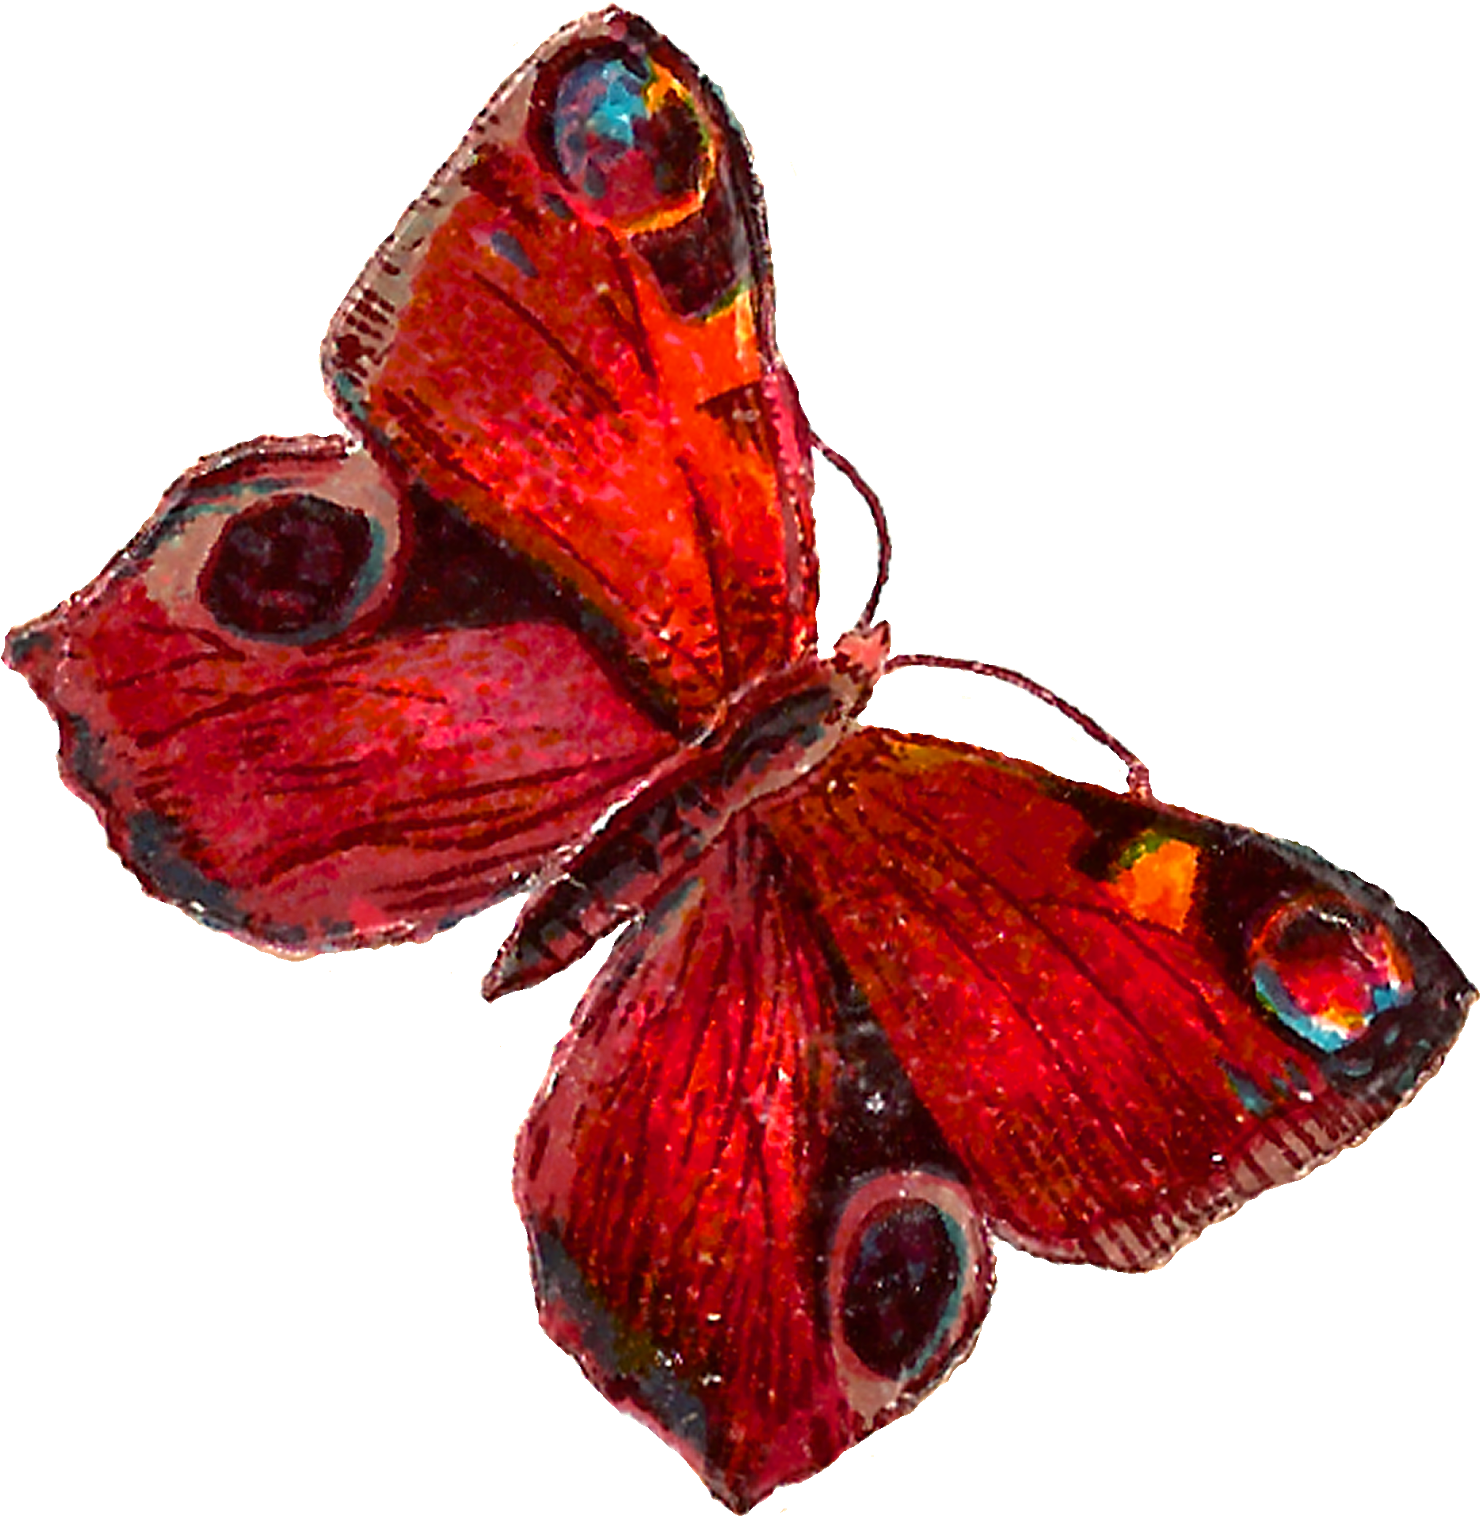 The Second Digital Butterfly Clip Art Is Of A Red Butterfly - Red Butterfly Png (1584x1600)